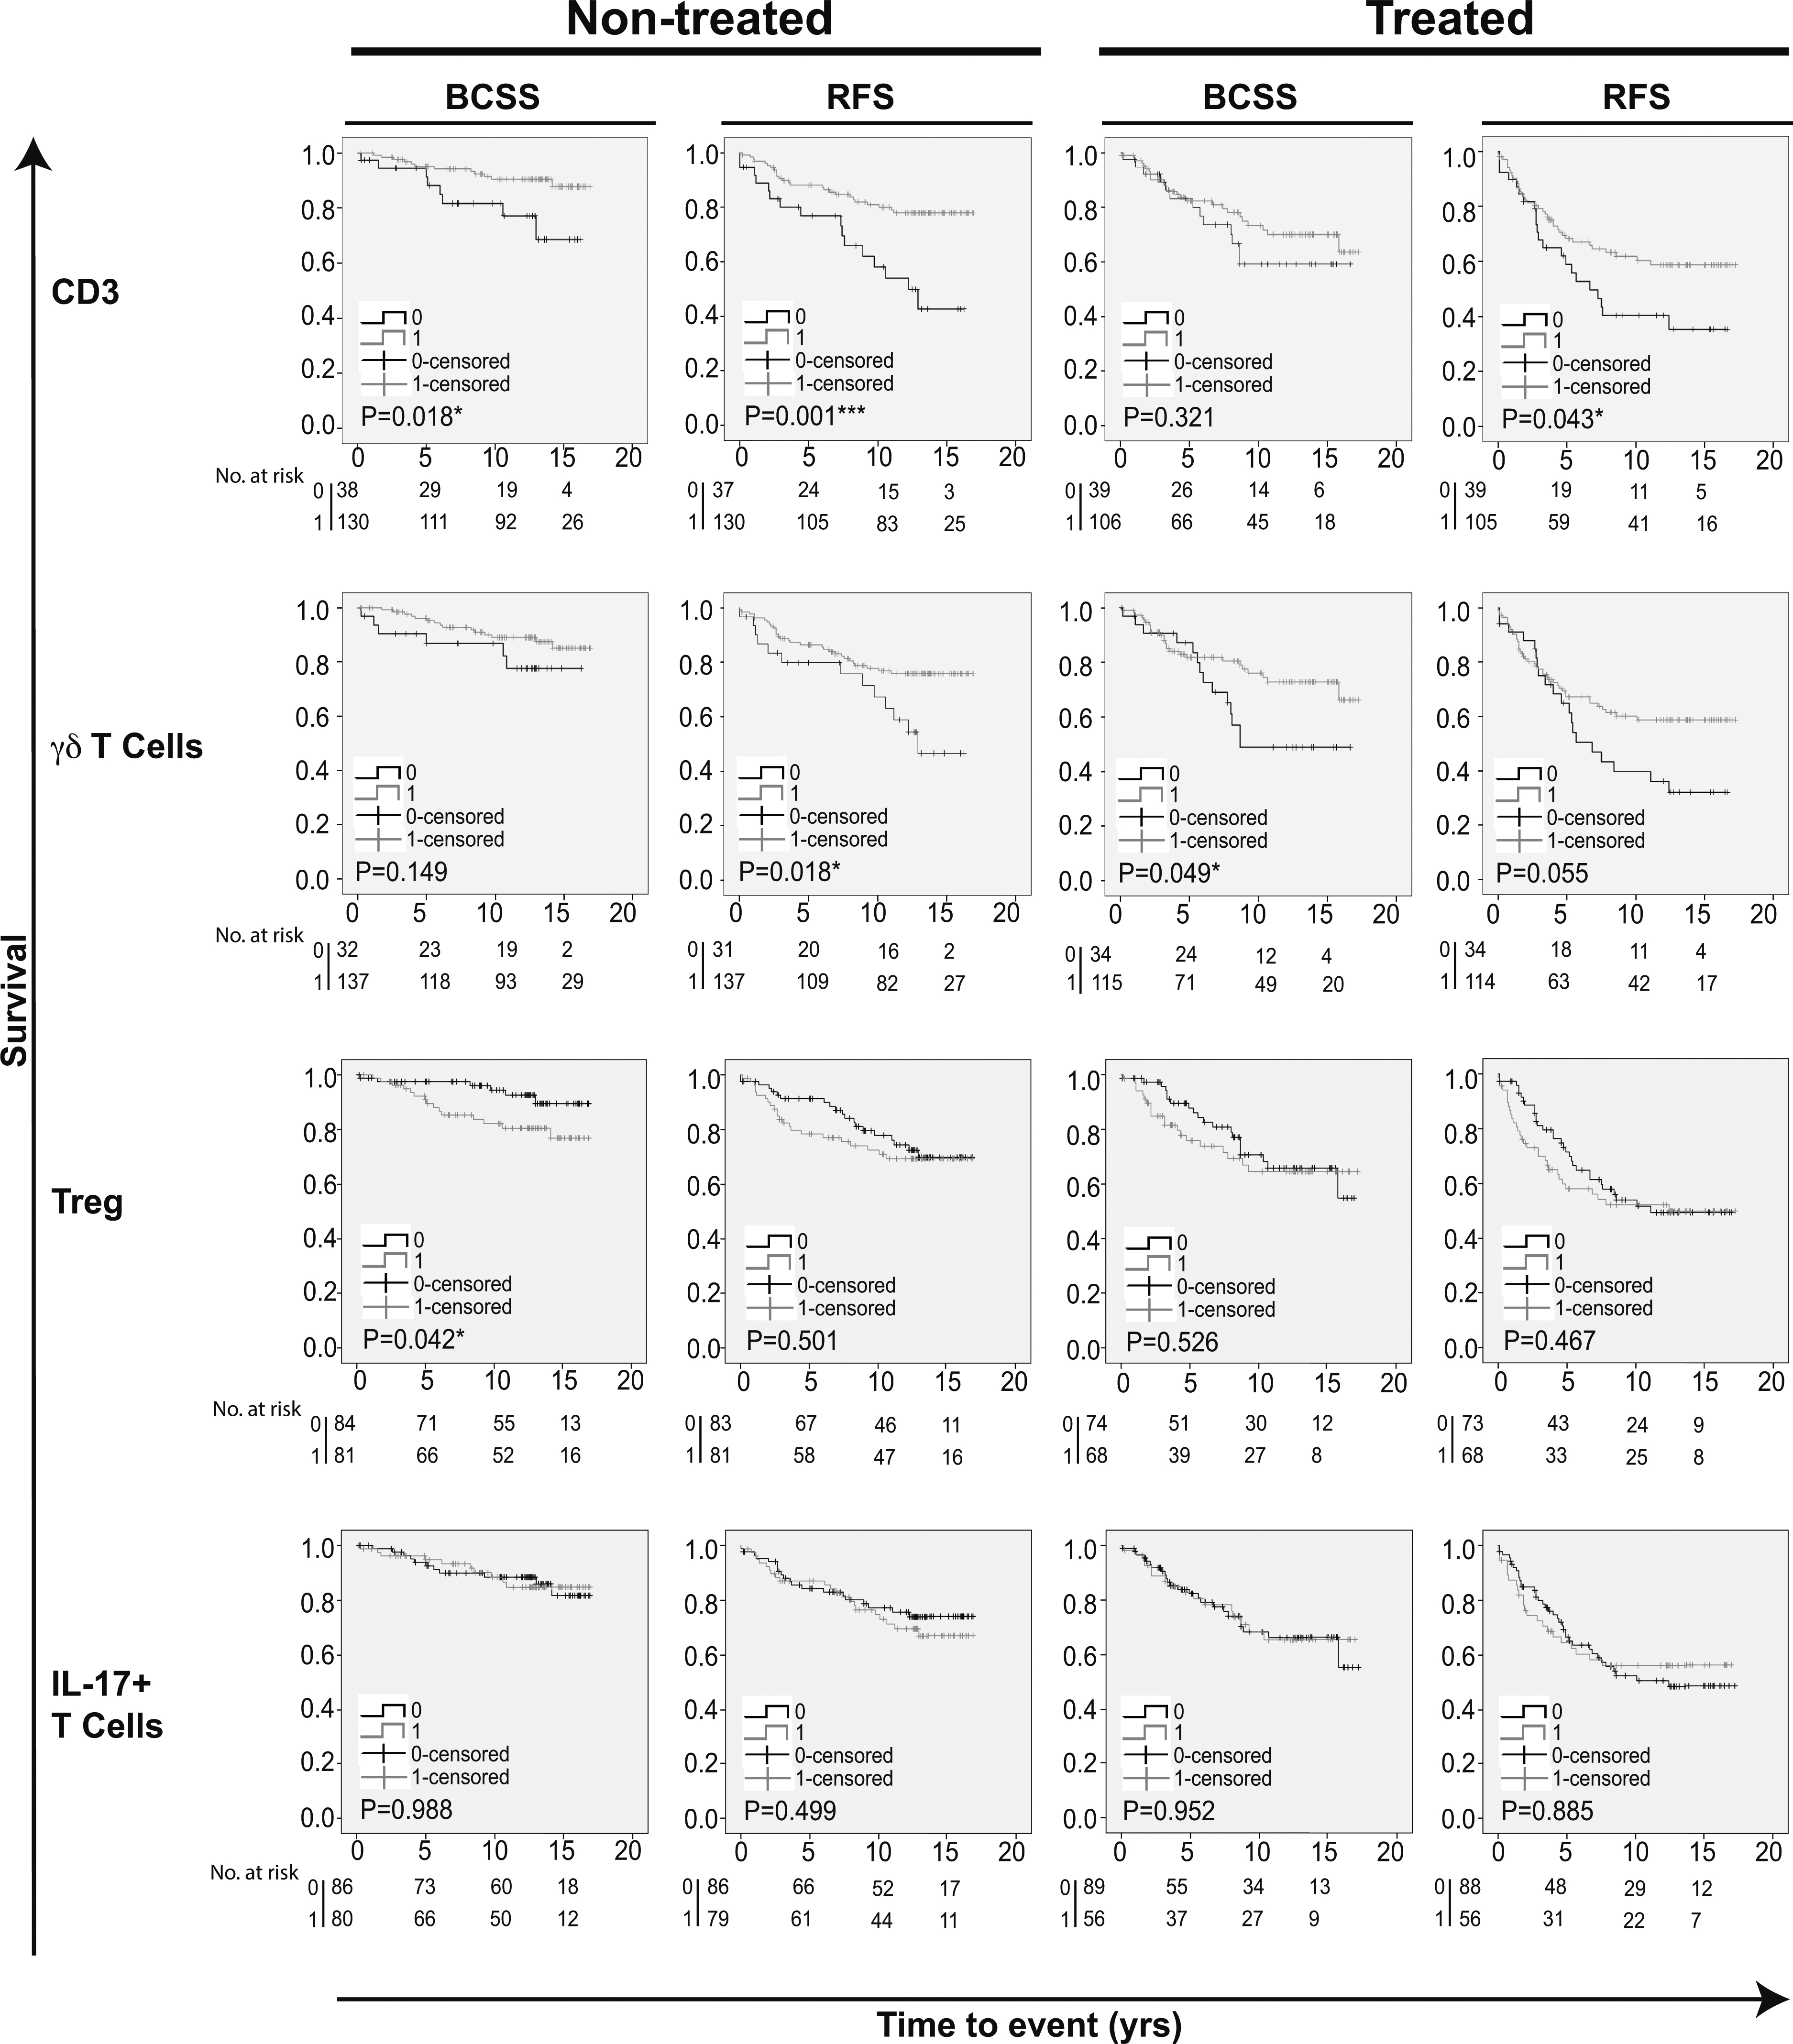 Kaplan-Meier estimates on survival according to different infiltrating T-cell populations in patients receiving and not receiving adjuvant endocrine therapy. Impact of pan-T cell CD3, γ⁢δ T cells, Tregs and IL-17+ T cells on both BCSS and RFS in breast cancer patients receiving and not receiving adjuvant endocrine therapy. The study cohort was conceived before clinical use of ER-testing, hence both groups includes both ER-positive and ER-negative patients. Log-rank P value < 0.05 was considered significant.